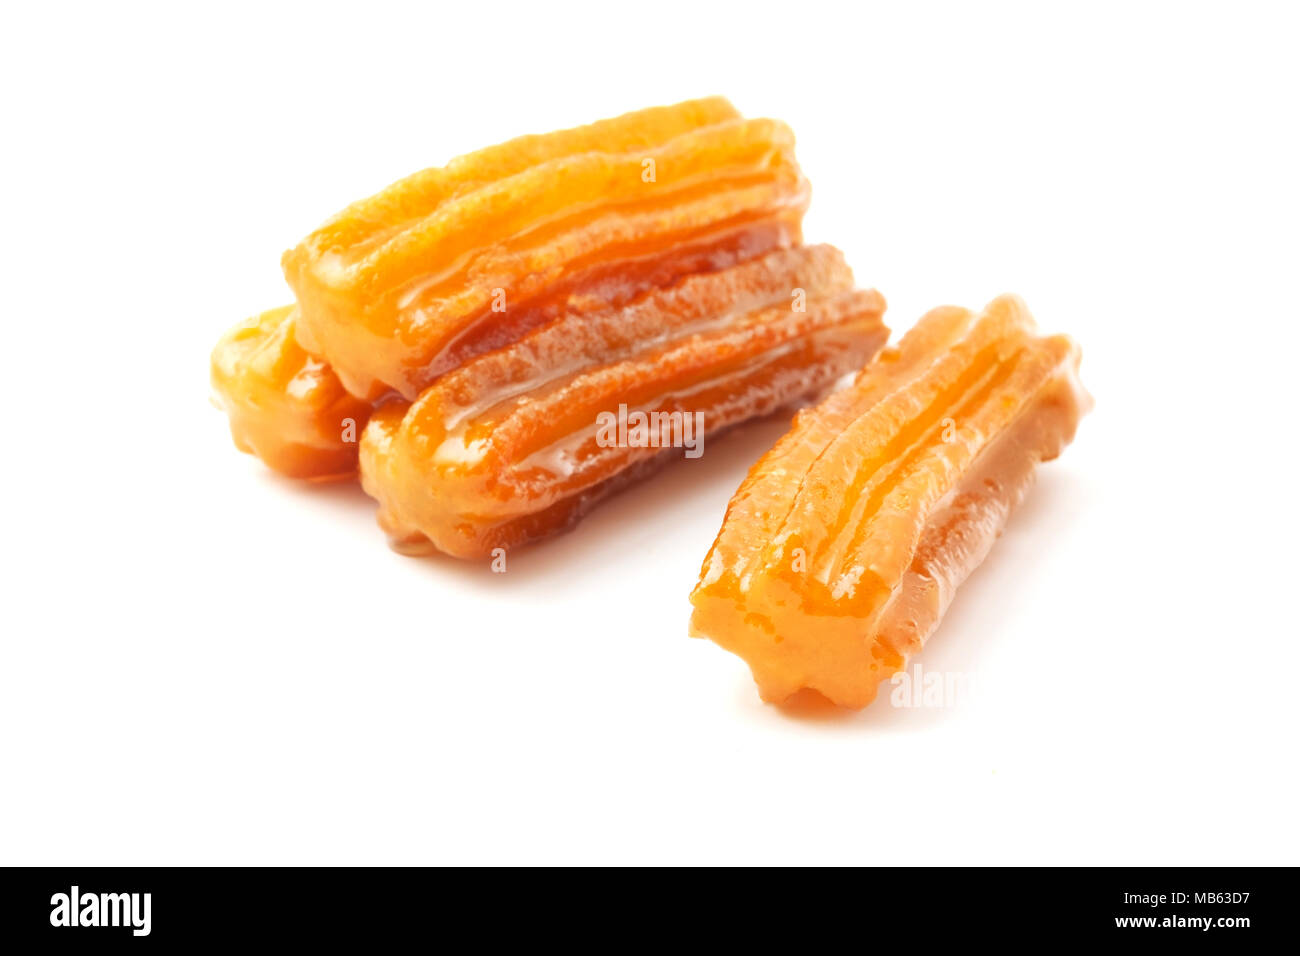 Tulumba (or Bamiyeh), a popular dessert found in the cuisines of the former Ottoman Empire, on a white background Stock Photo